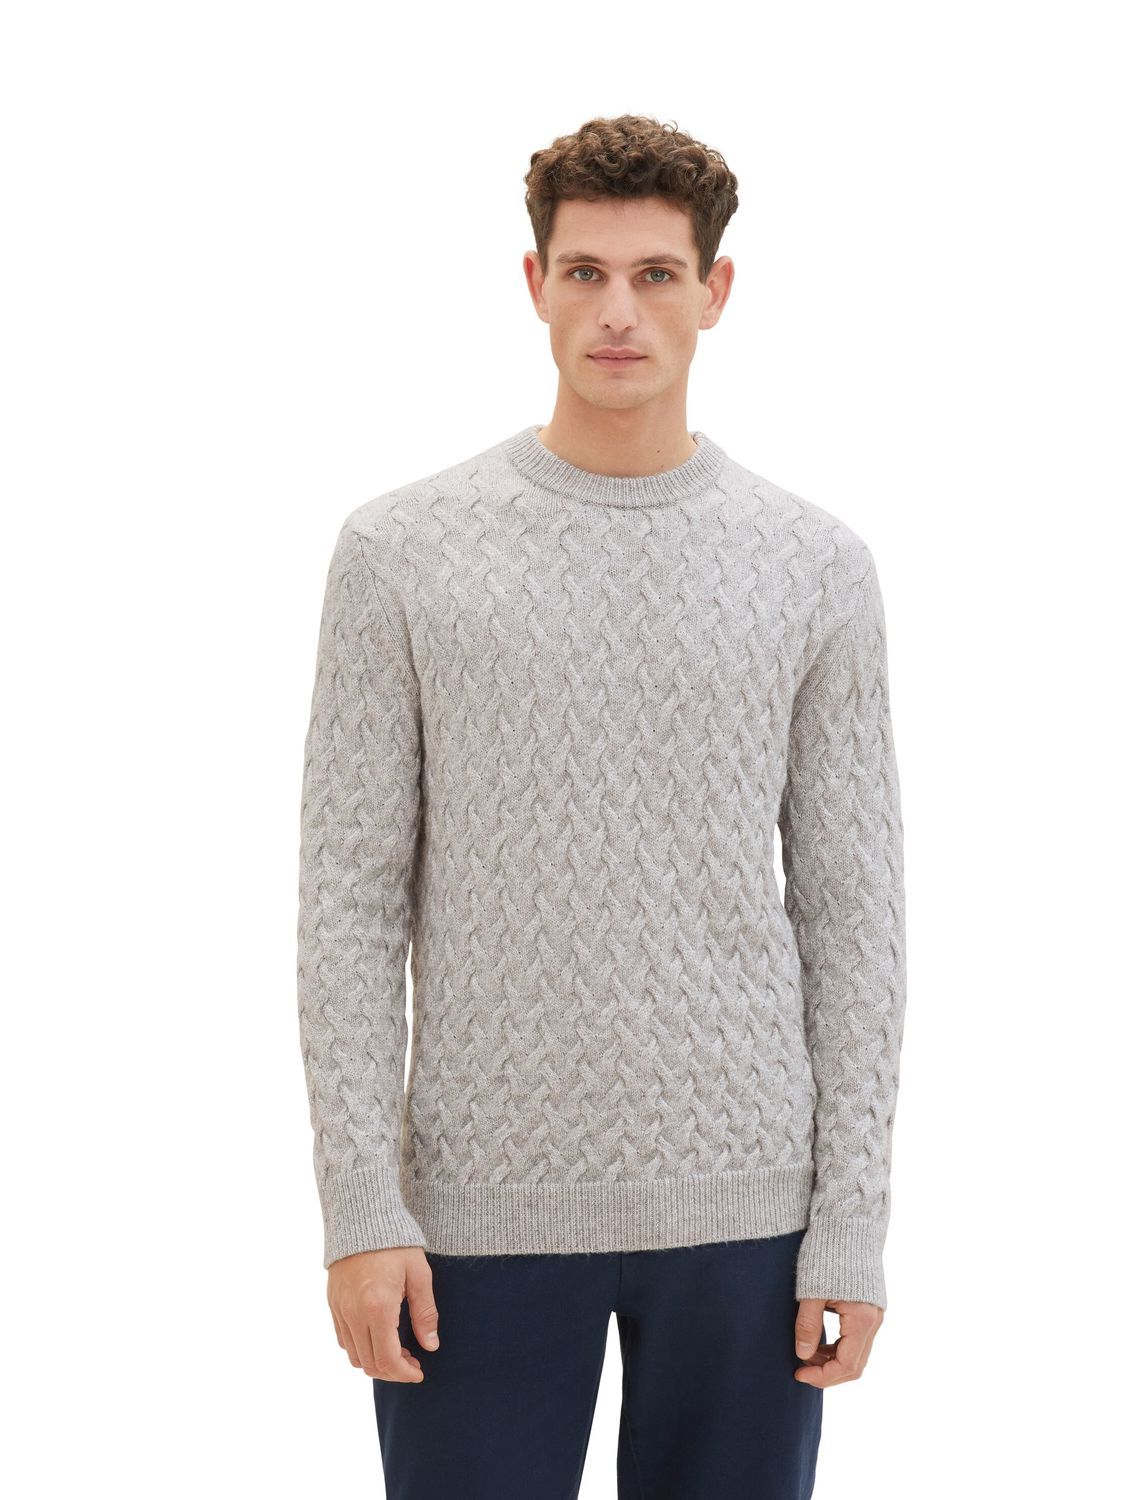 Пуловер Tom Tailor COSY CABLE KNIT, серый свитер tom tailor 1038195 cosy knit turtle neck серый